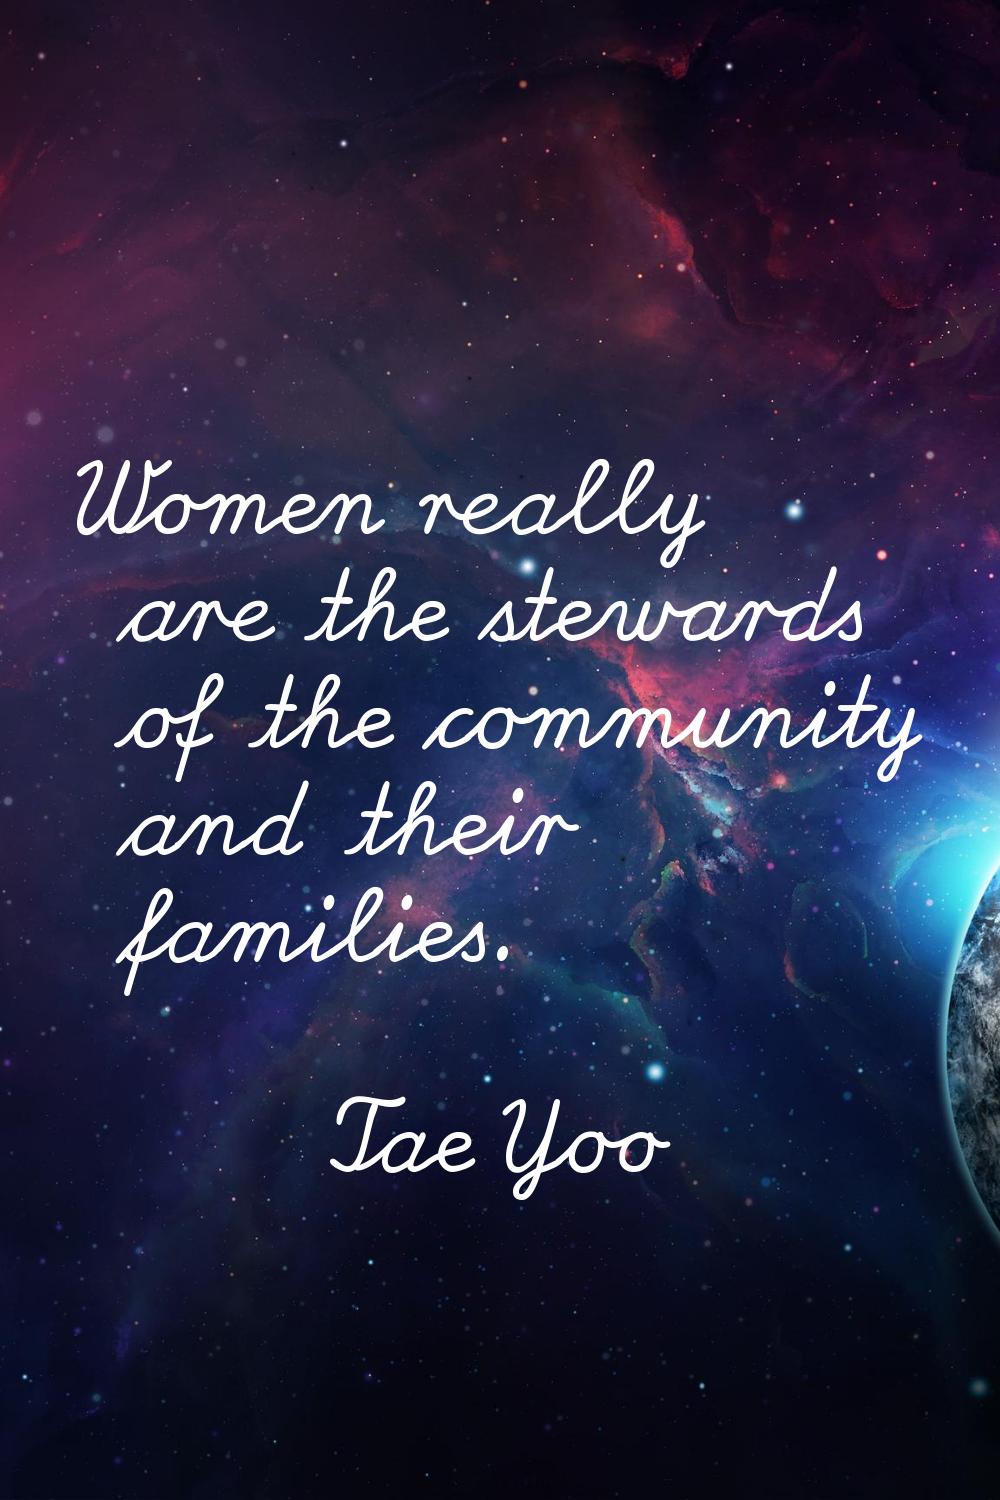 Women really are the stewards of the community and their families.